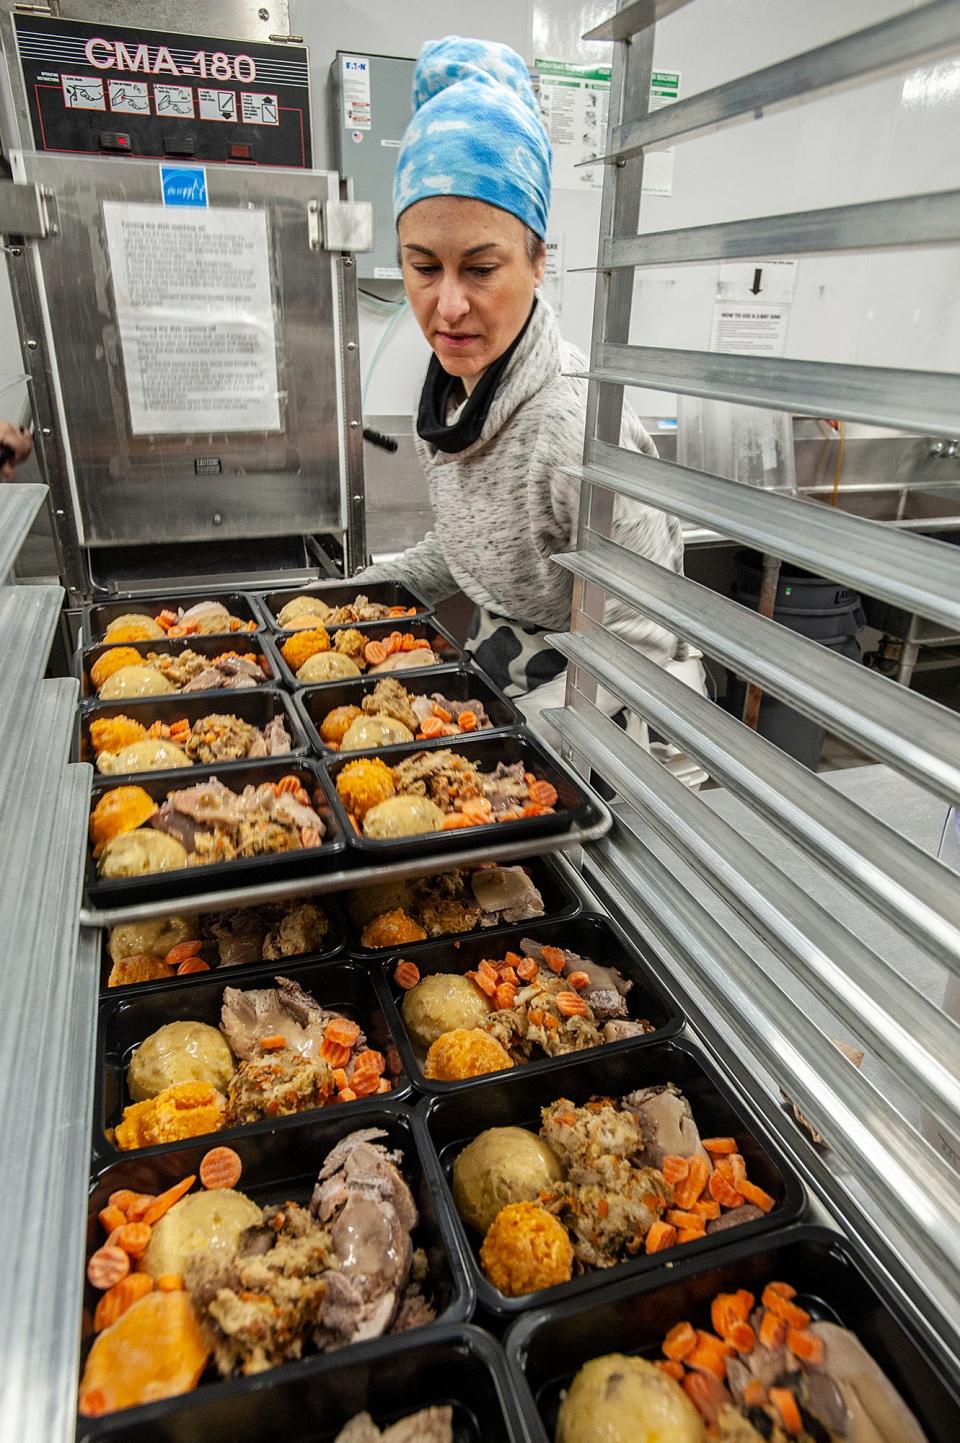 Beth Dergarabedian was part of the assembly line at Open Table in Maynard that prepared 500 Thanksgiving meals on Nov. 13.